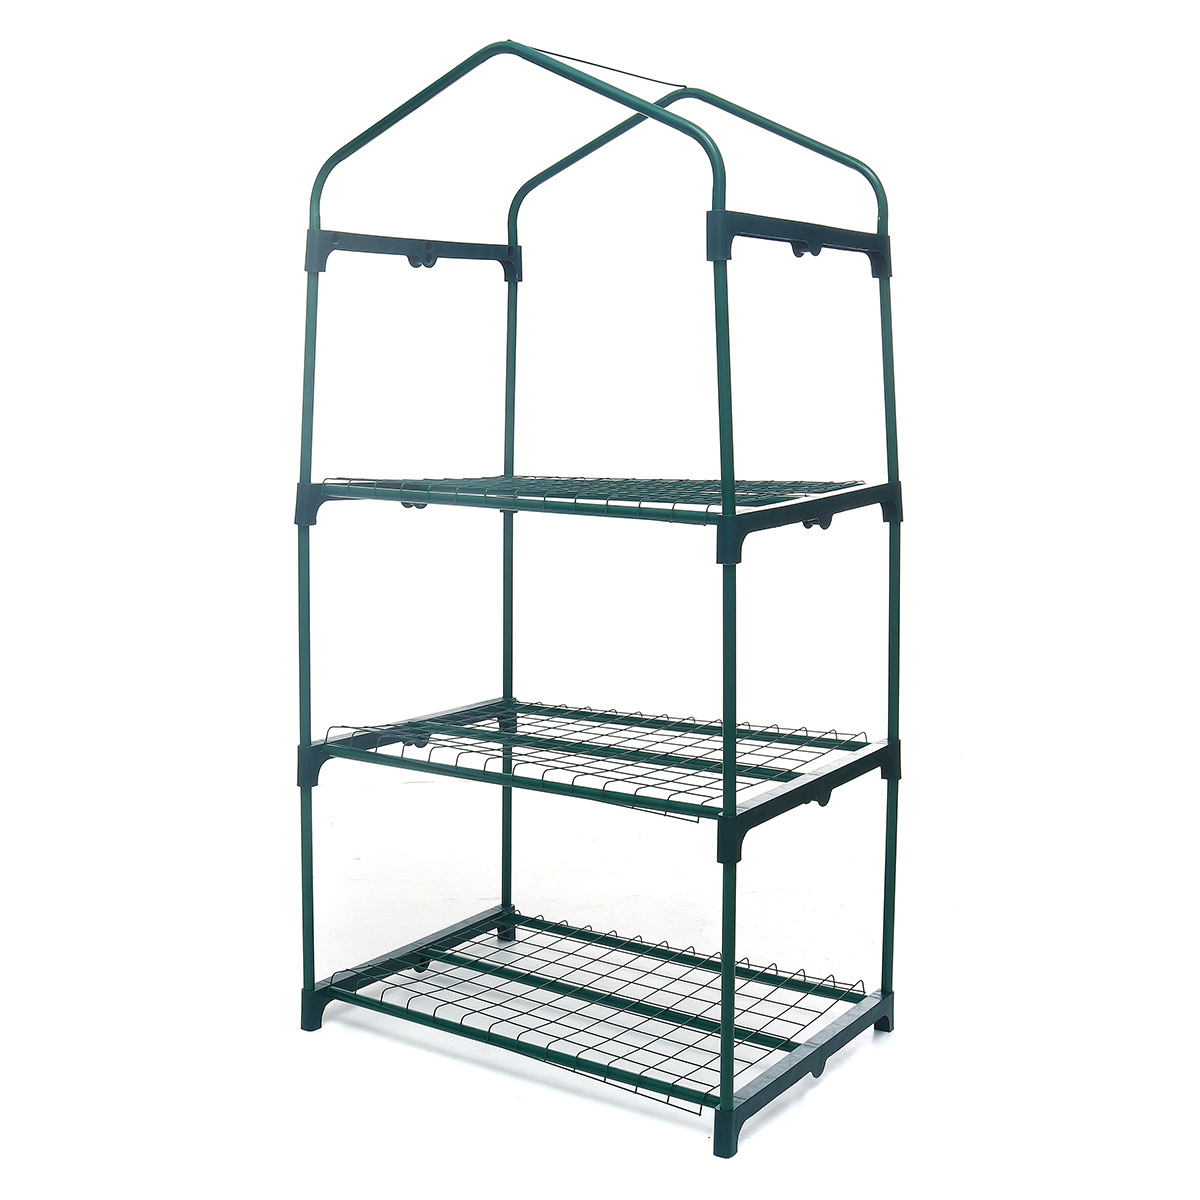 Mini-Greenhouse-AUEDW-3-Shelves-IndoorOutdoor-Greenhouse-with-Zippered-Cover-and-Metal-Shelves-for-G-1592630-4